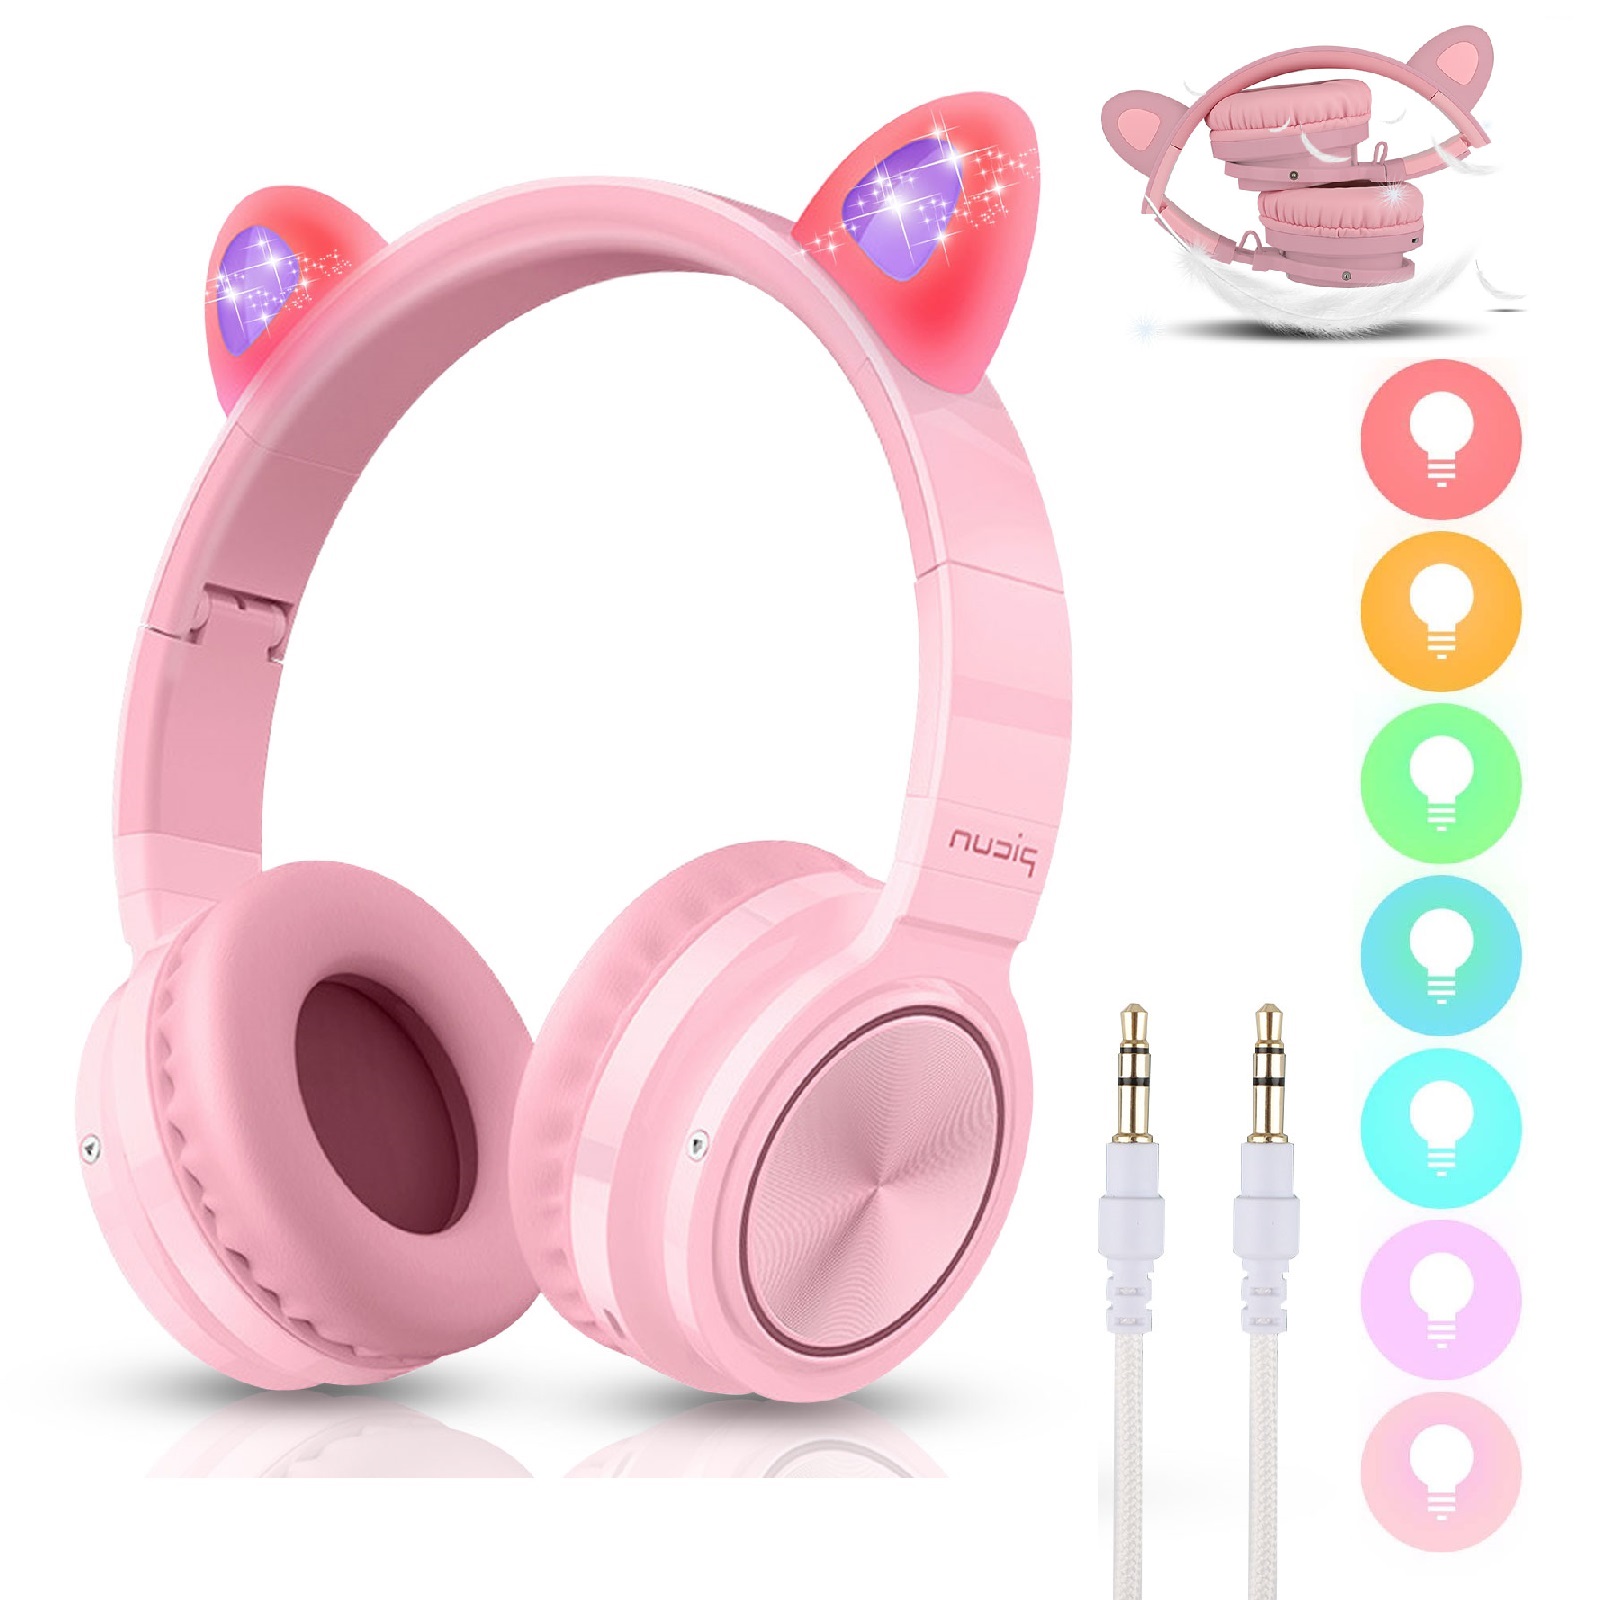 Rabbit Headband Stereo Headphones Microphone Portable Wired Headset for Kids Girls Mobile Phone iPhone Samsung Gift Black